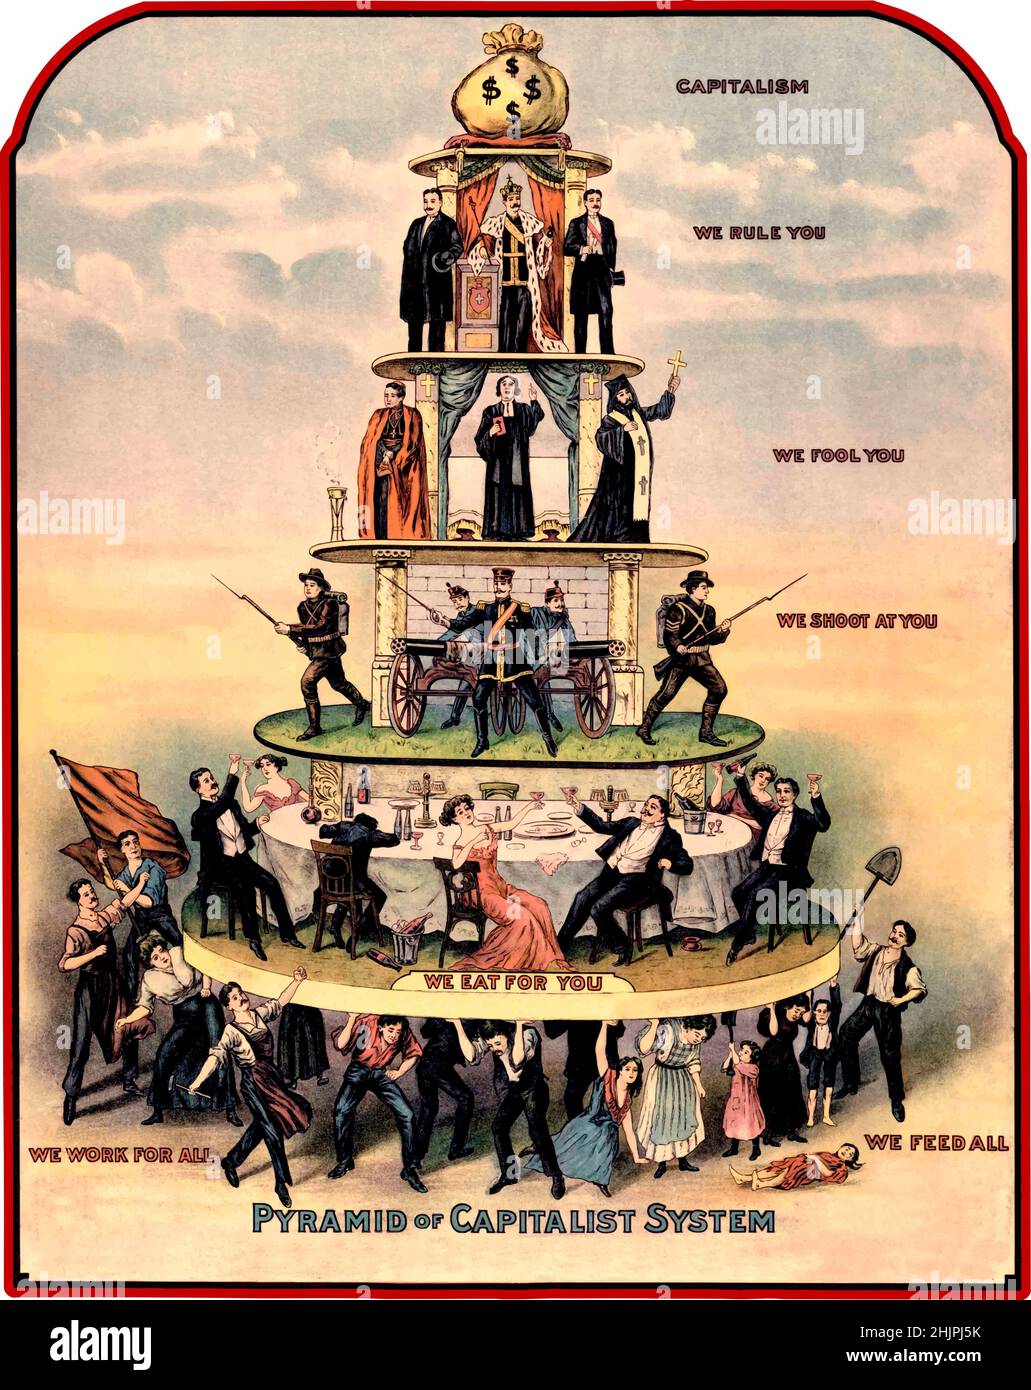 The Pyramid of Capitalist System is a common name of a 1911 American cartoon caricature critical of capitalism, copied from a Russian flyer of c. 1901. The graphic focus is on social stratification by social class and economic inequality. It was published in the 1911 edition of Industrial Worker (The International Publishing Co., Cleveland, Ohio, U.S.), a newspaper of the Industrial Workers of the World, and attributed to 'Nedeljkovich, Brashich, & Kuharich Stock Photo